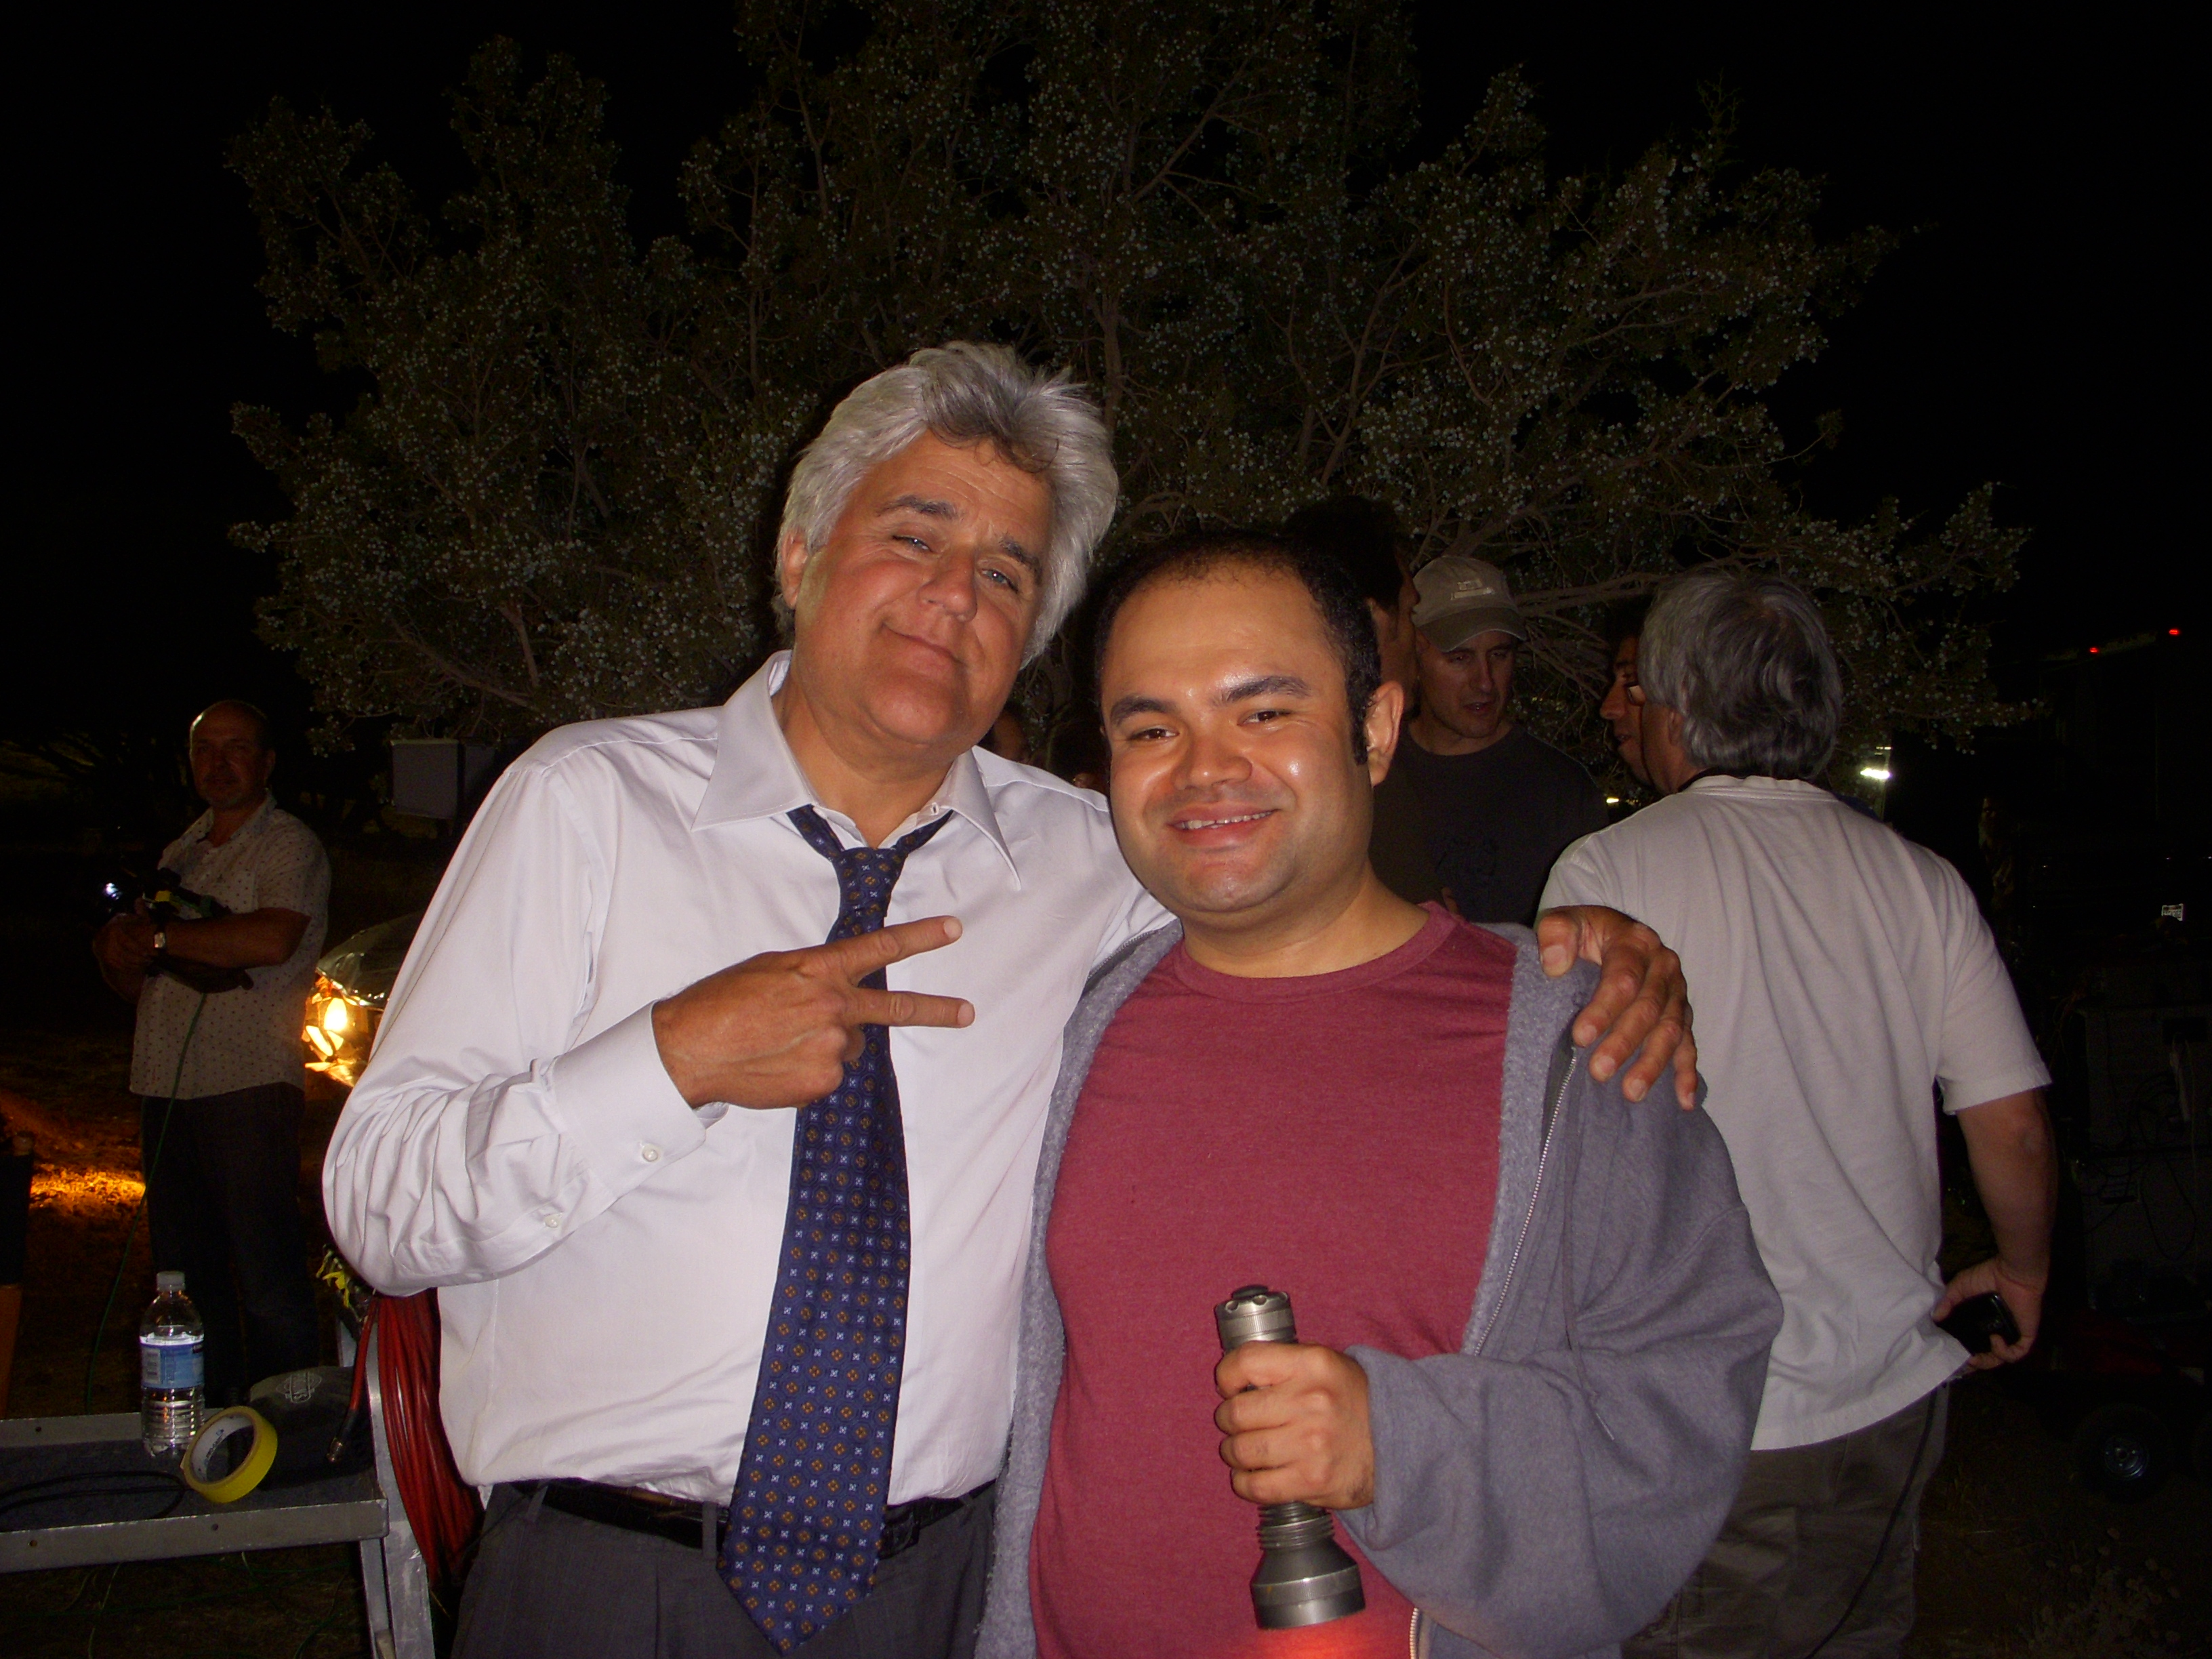 Jay Leno and Erick Chavarria on the set of a promo for the short-lived Jay Leno Show on NBC